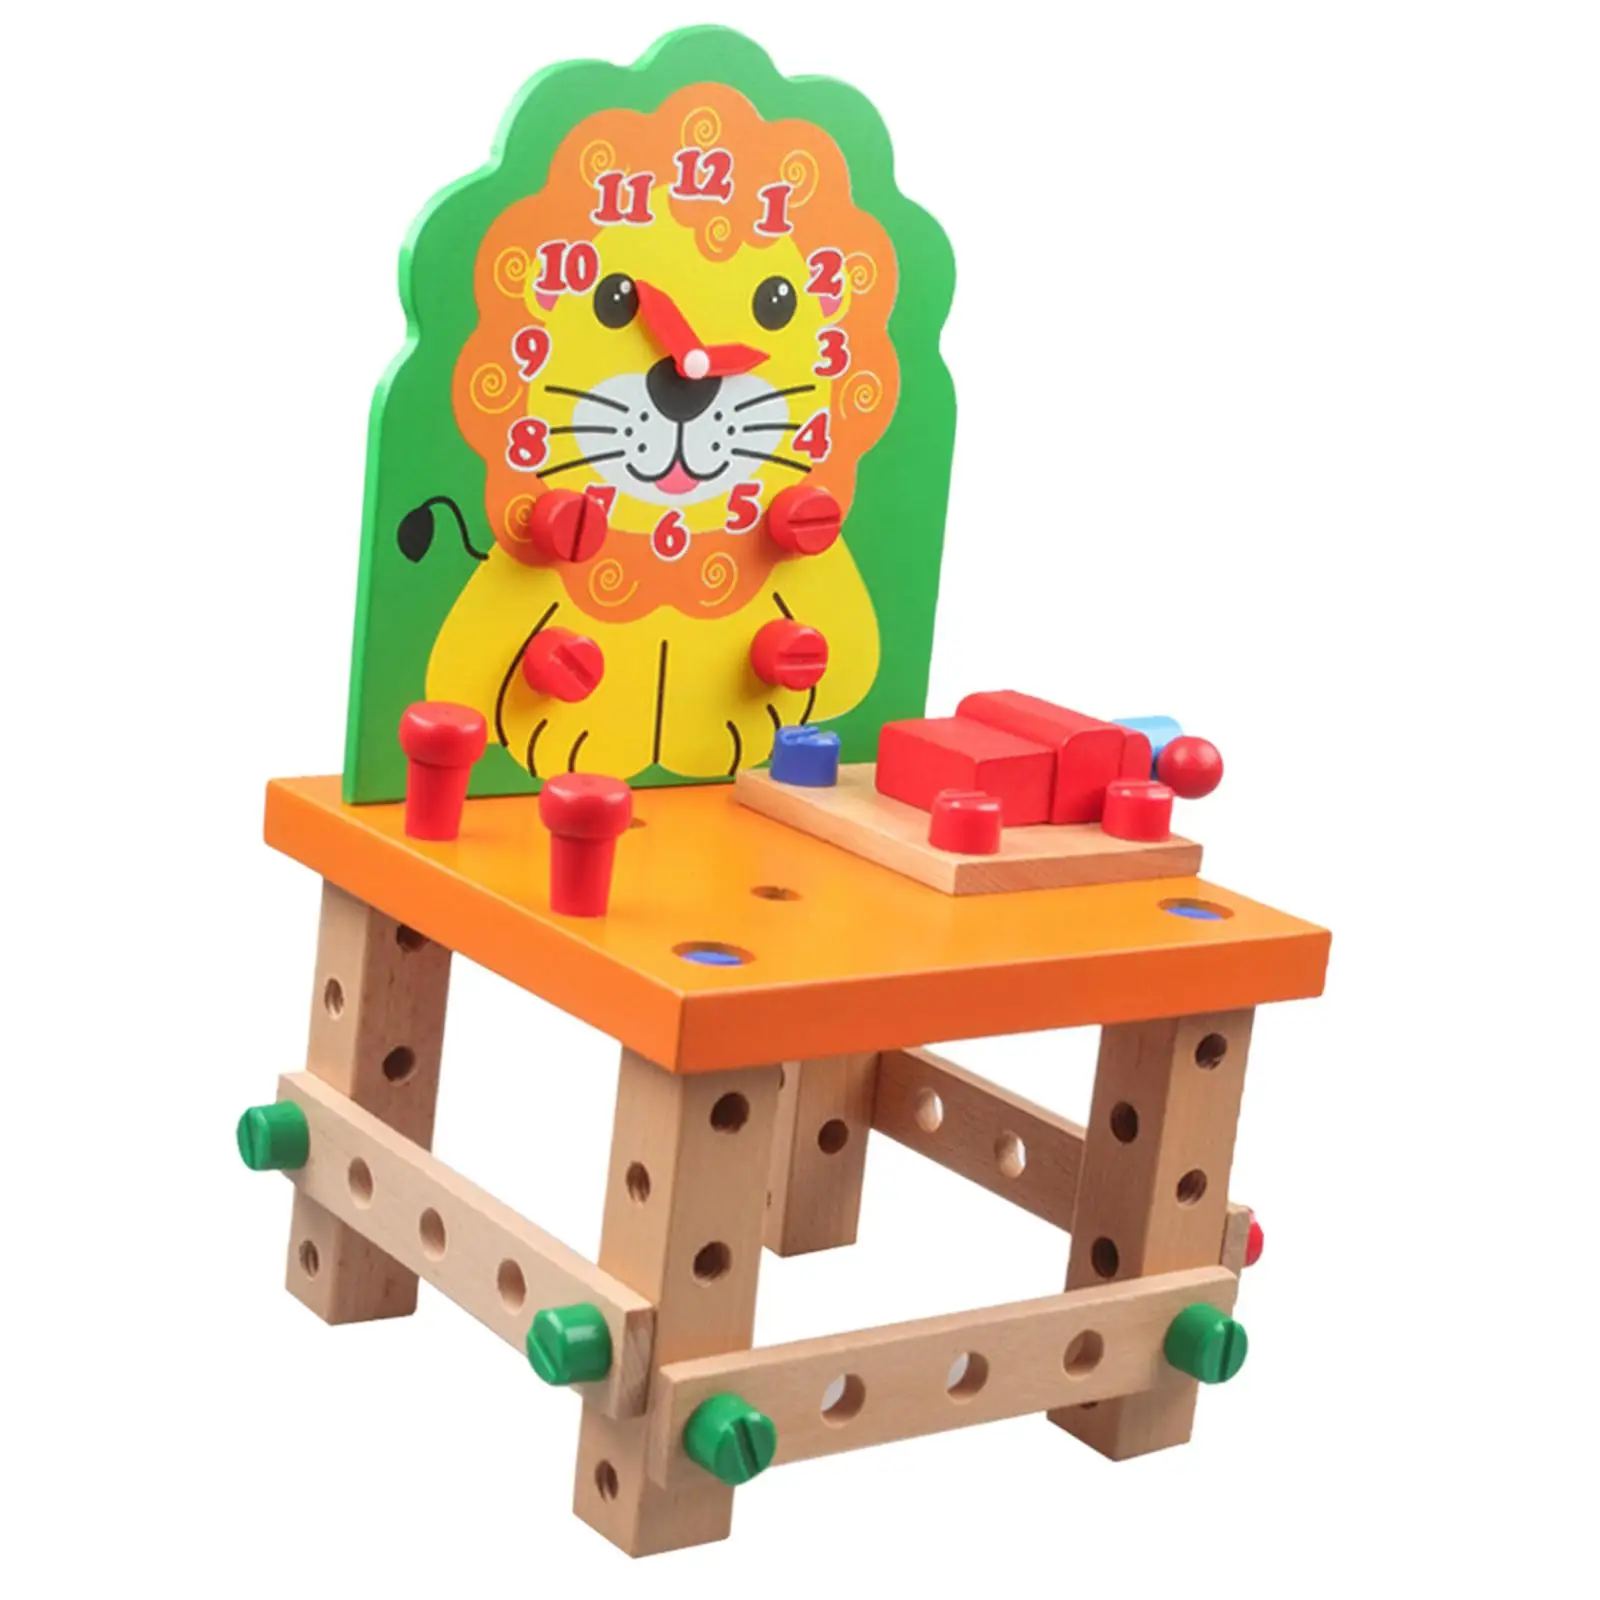 Wooden Assembling Chair Educational Building Toy for Toddler Birthday Gifts